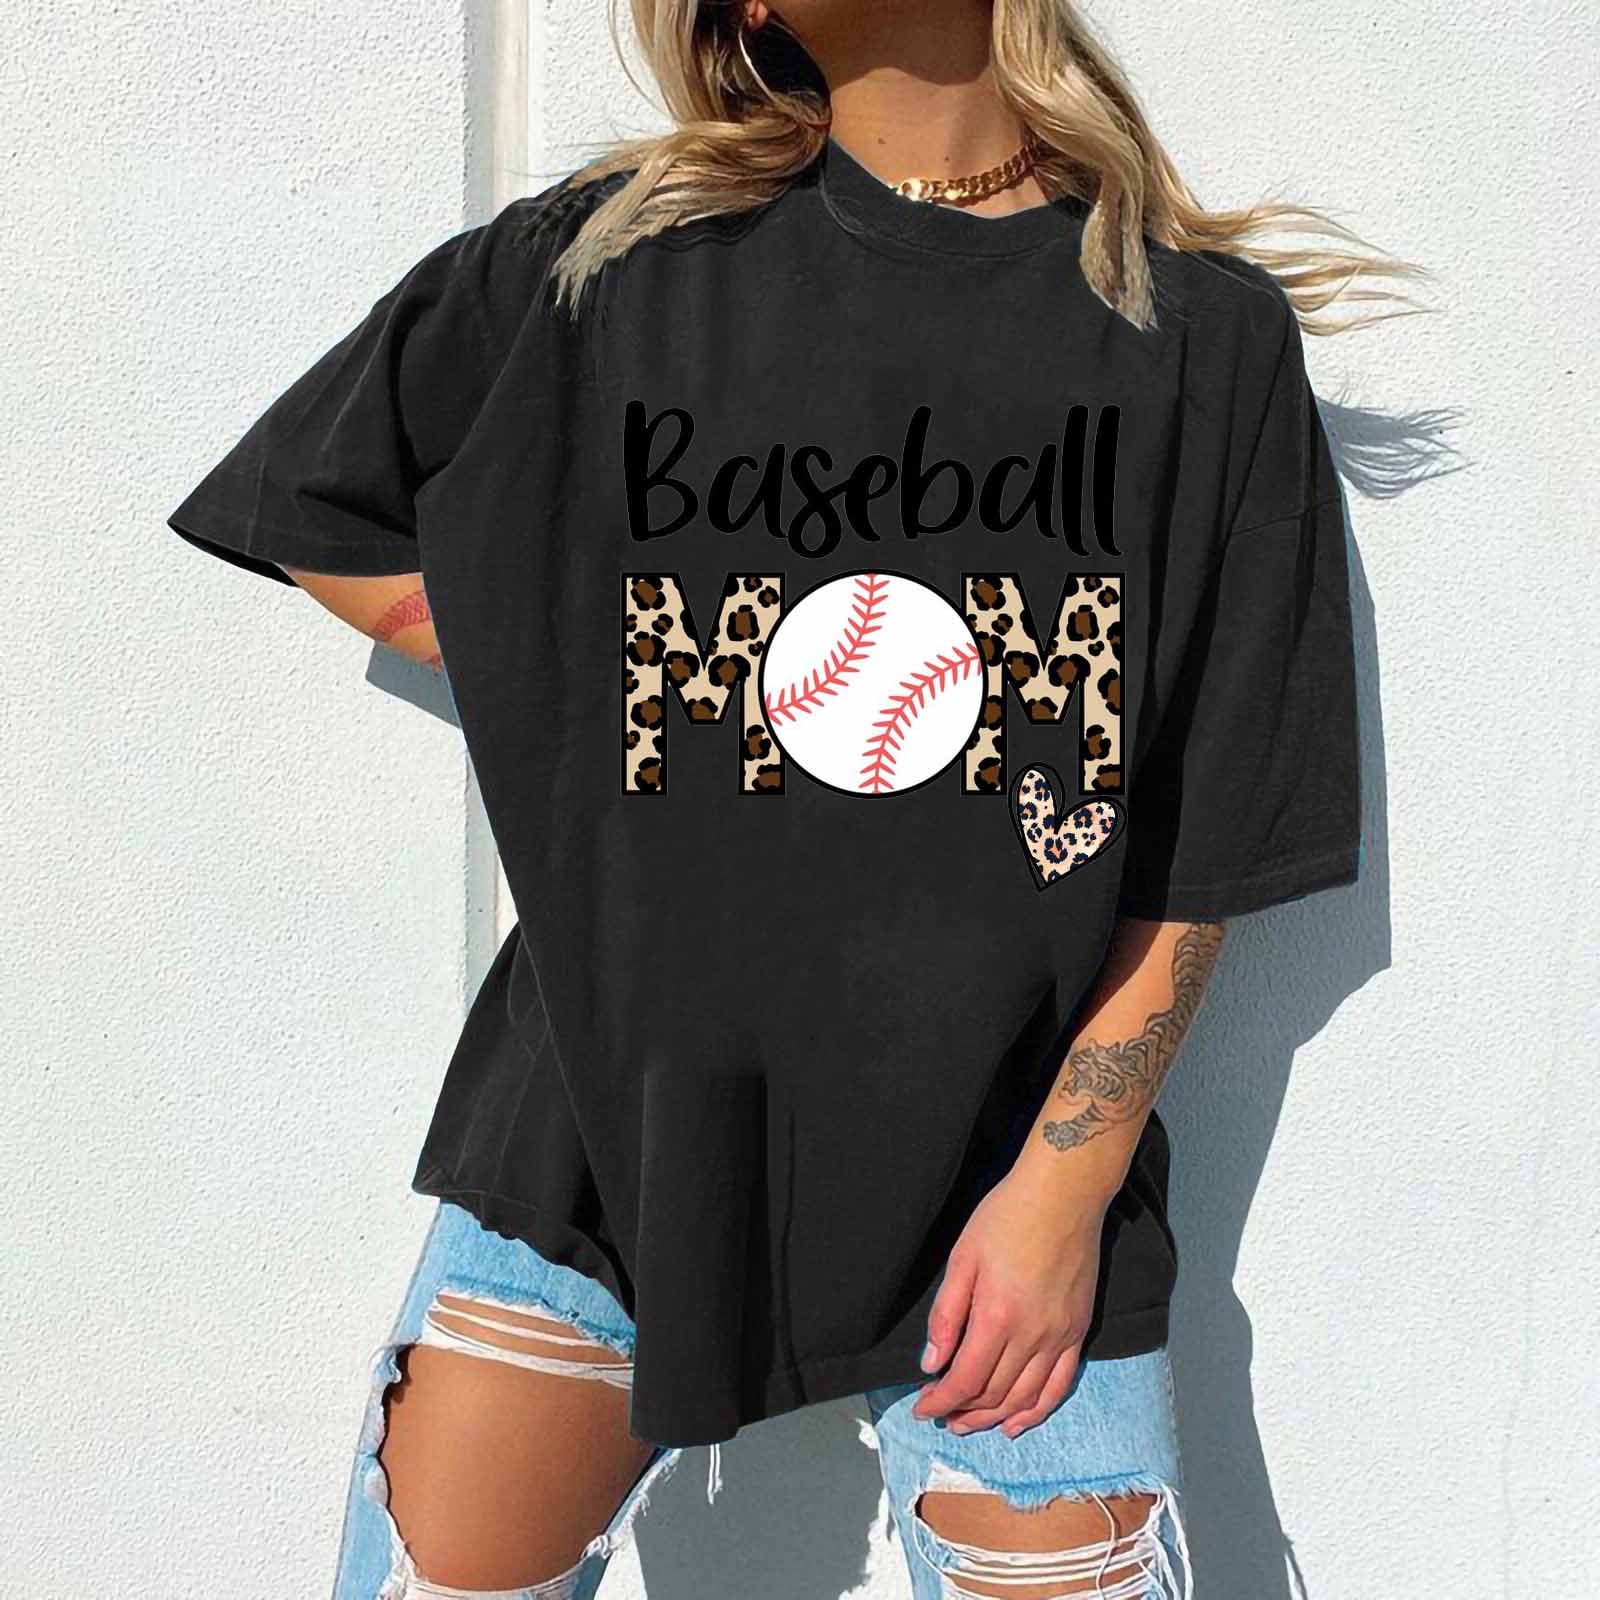 Short Sleeve Tops for Women Summer Graphic Tshirts Loose Fit Vintage Printed Summer Tees Casual V Neck Tunic Blouses 